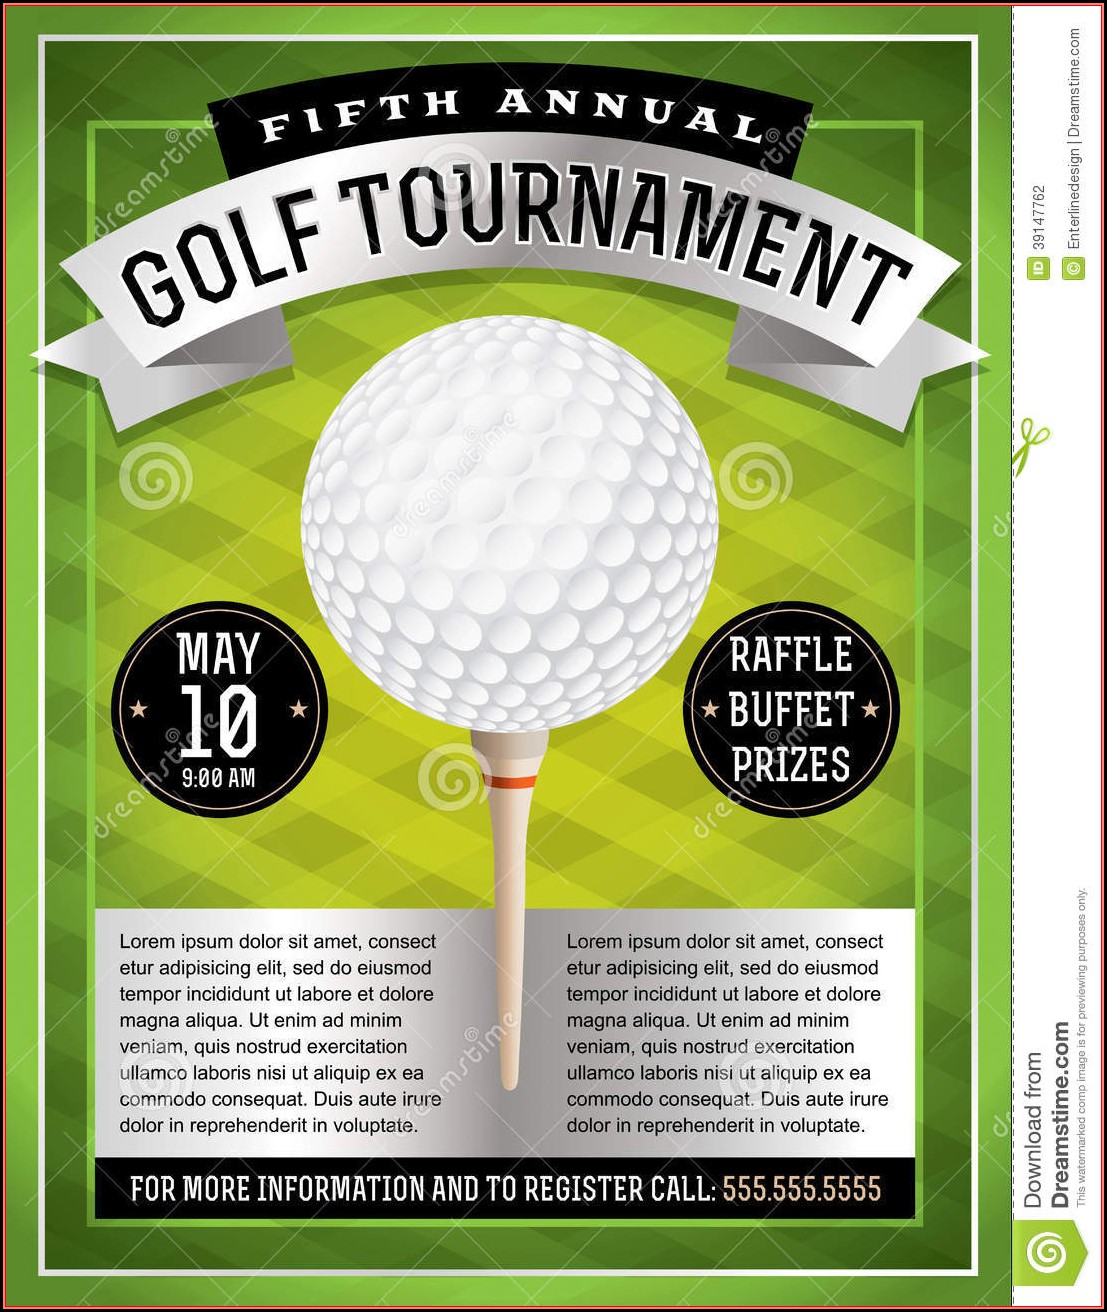 Free Golf Tournament Flyer Template Publisher